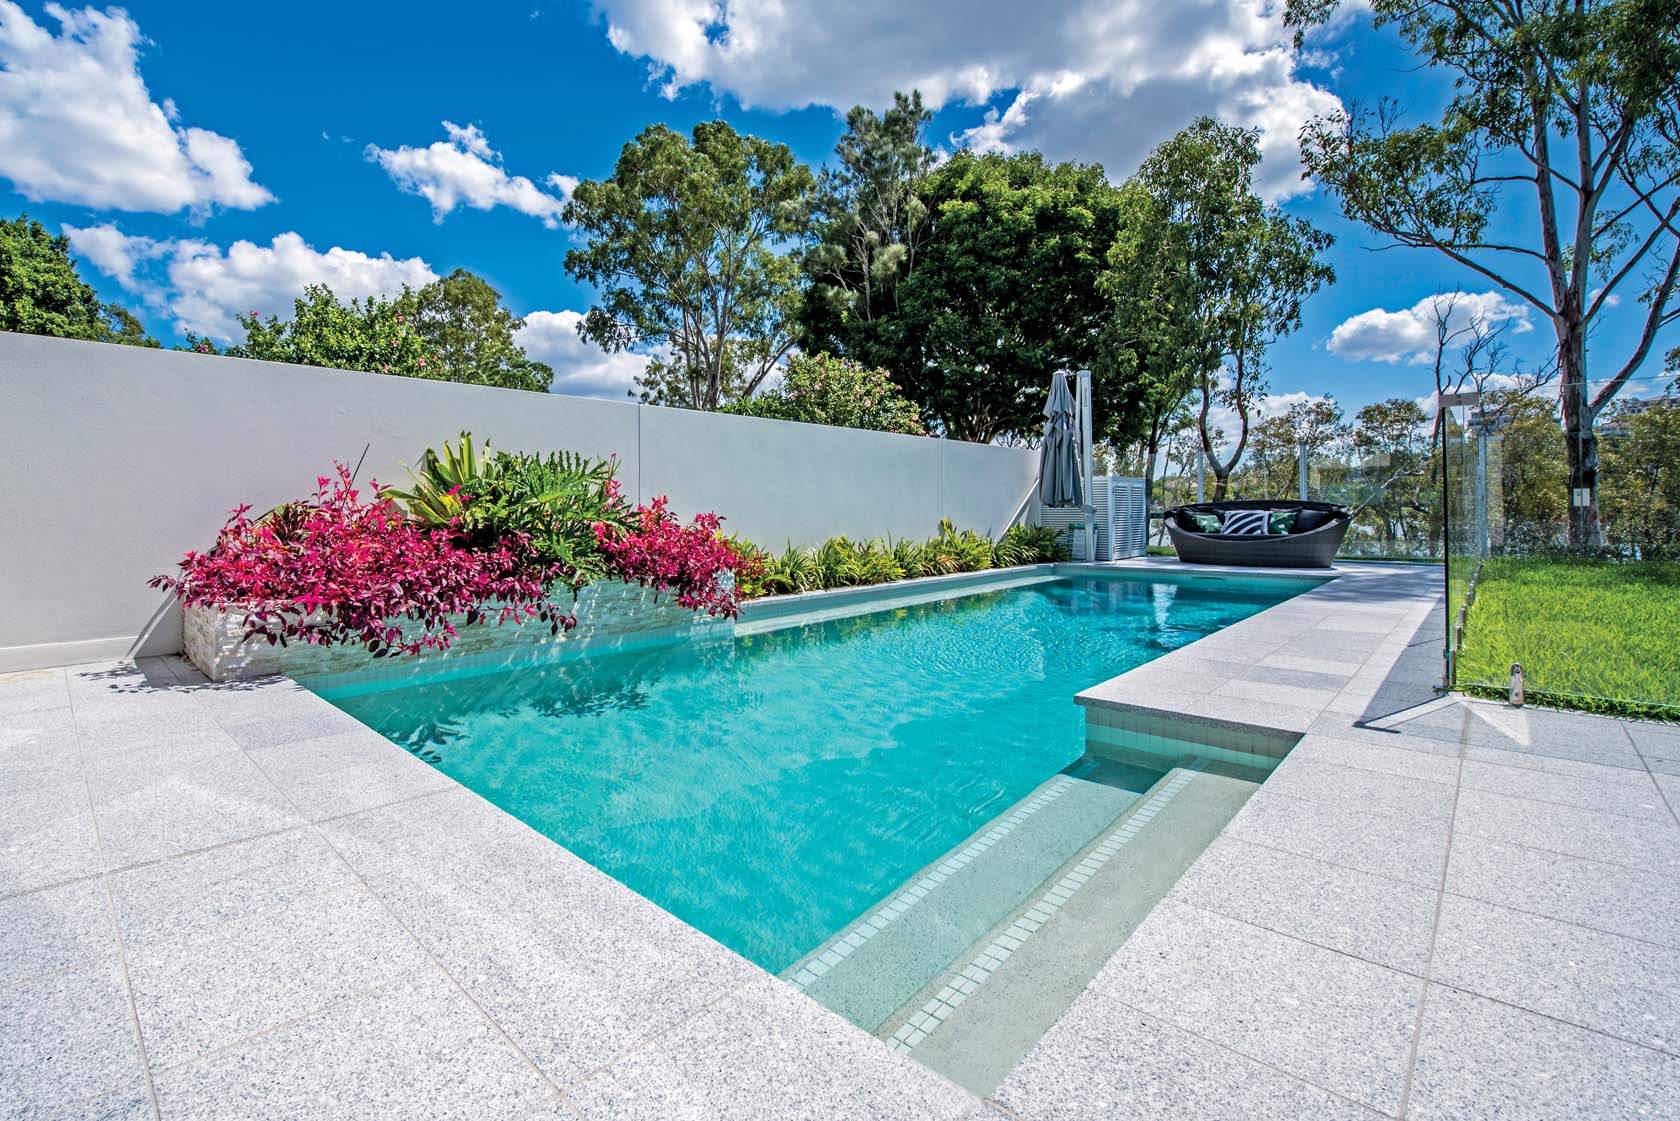 Light Grey Granite pool coping and surround tiles with White Crystal glass waterline and Gold Stone cladding